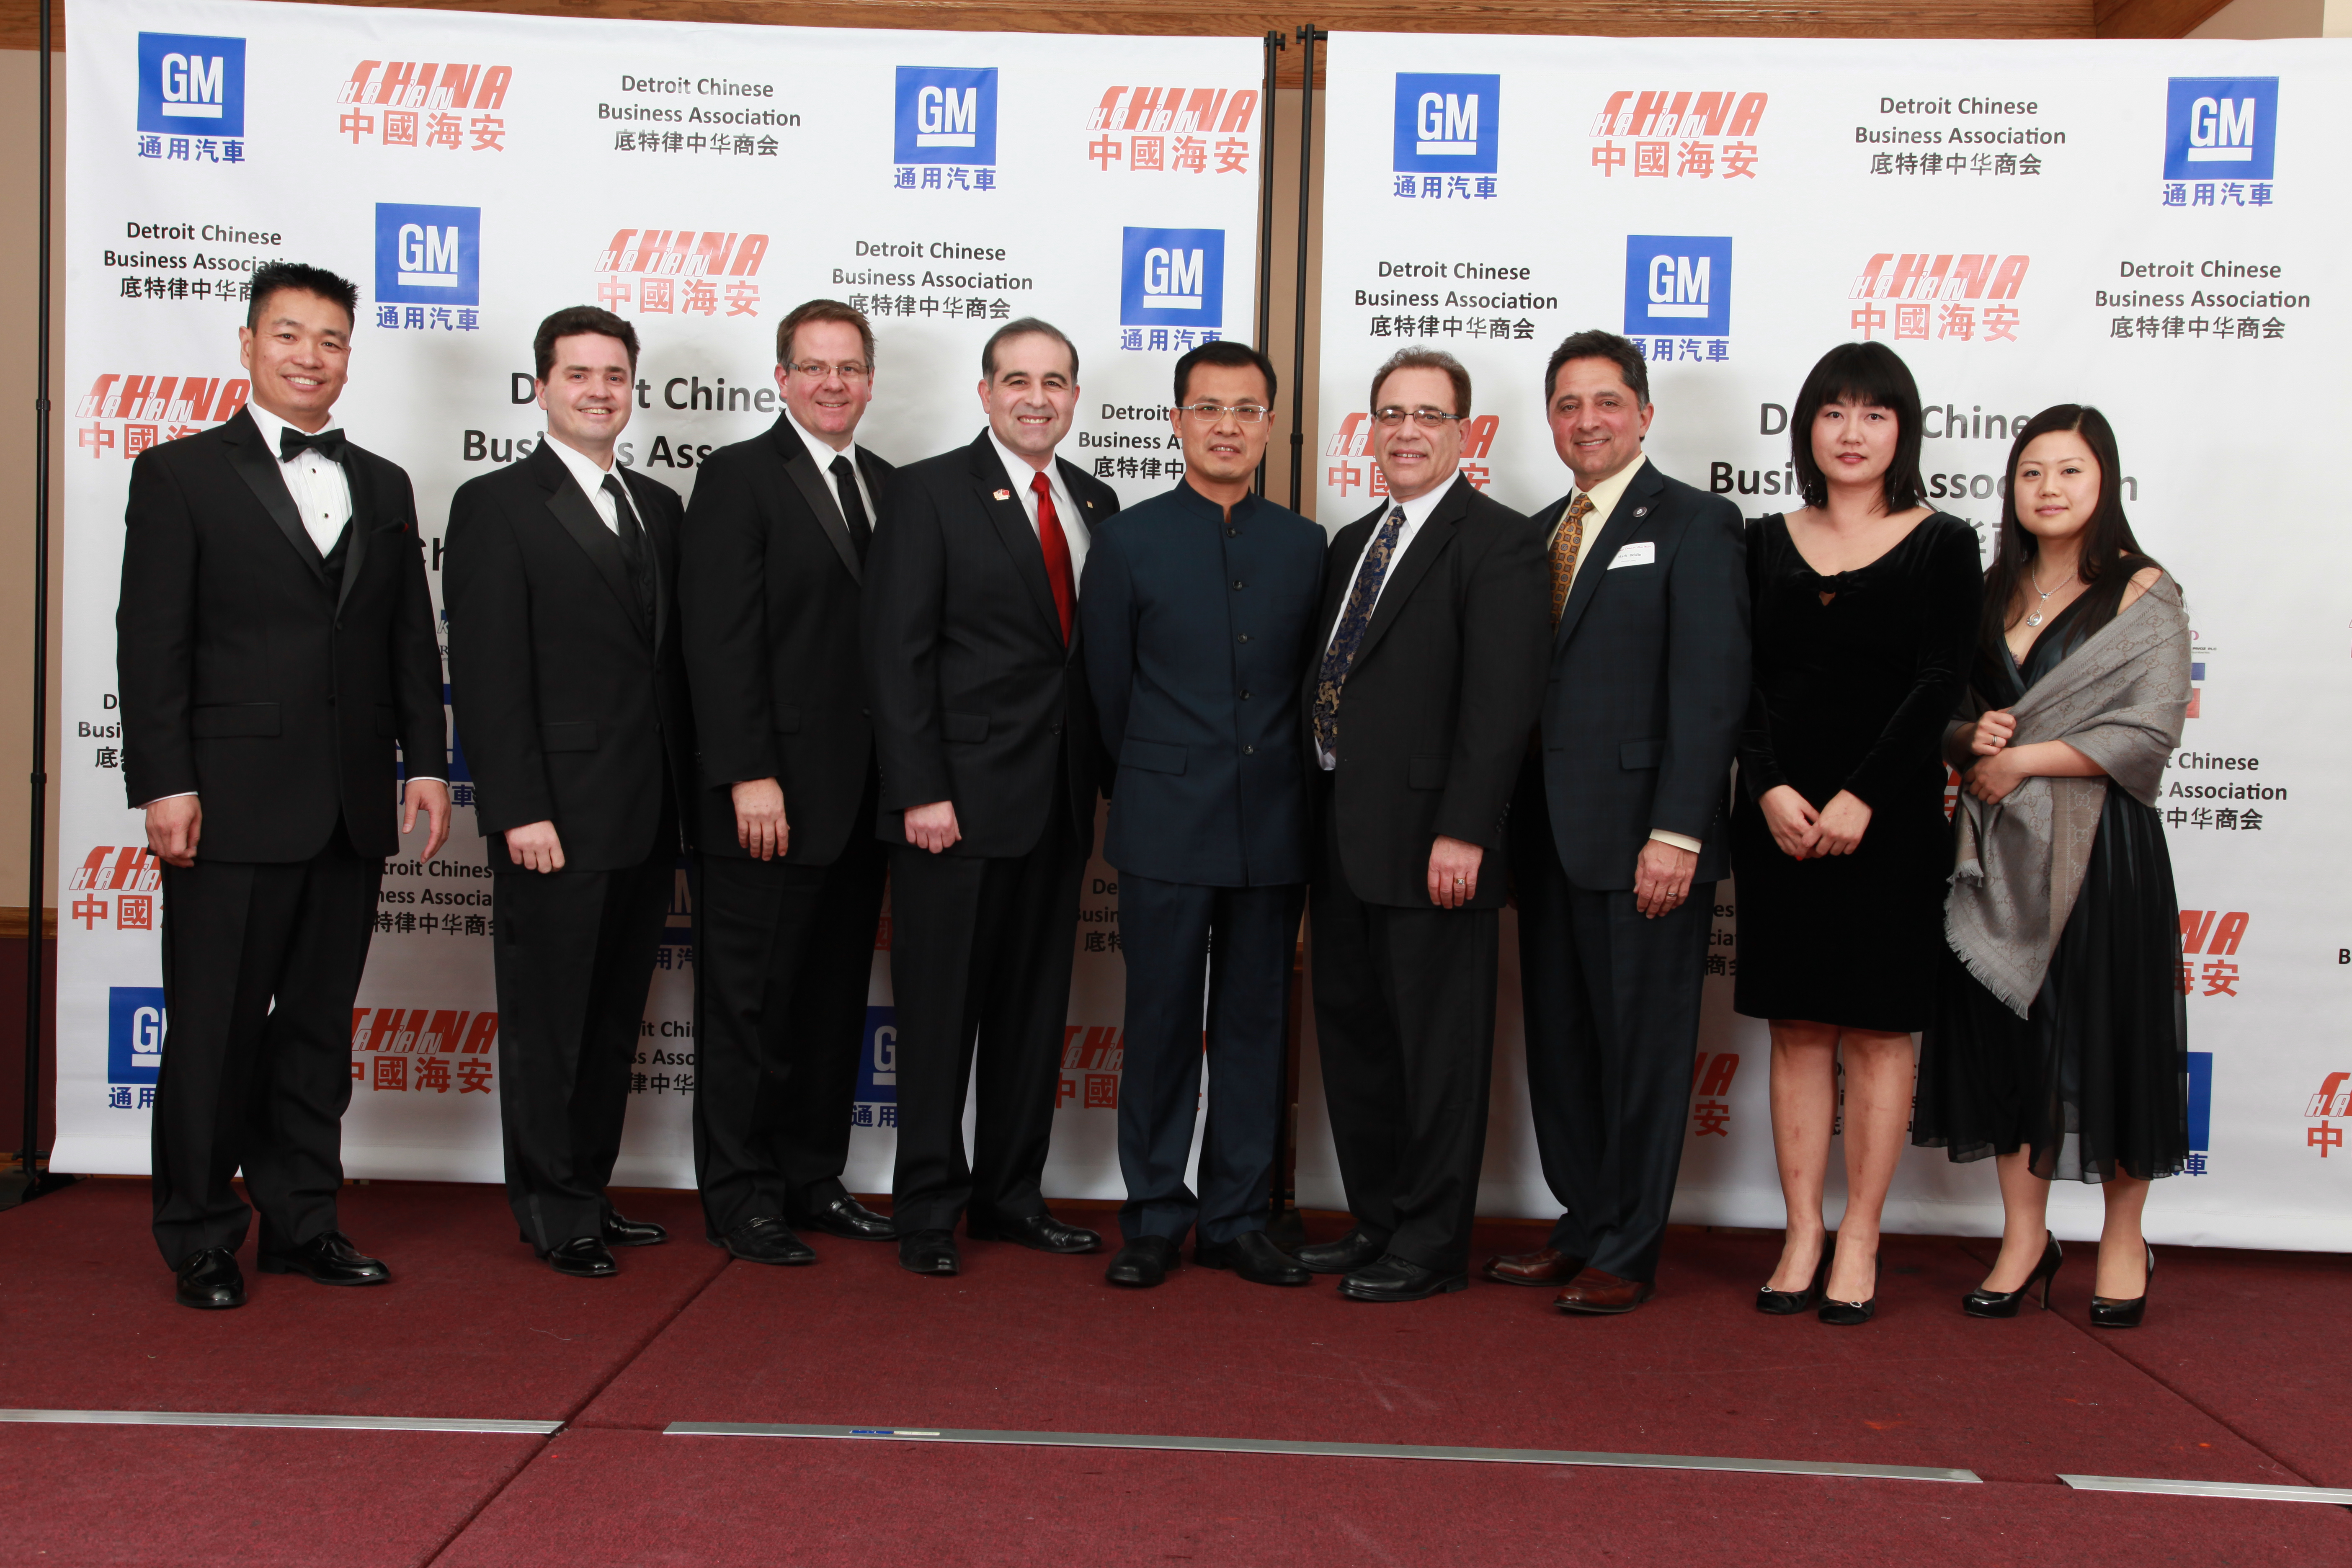 Jerry Xu, (on left) president of the Detroit Chinese Business Association with other luminaries welcoming China's new Midwest Consult General Zhao Weiping at an event in Troy a few weeks ago. (credit: CBS 62)